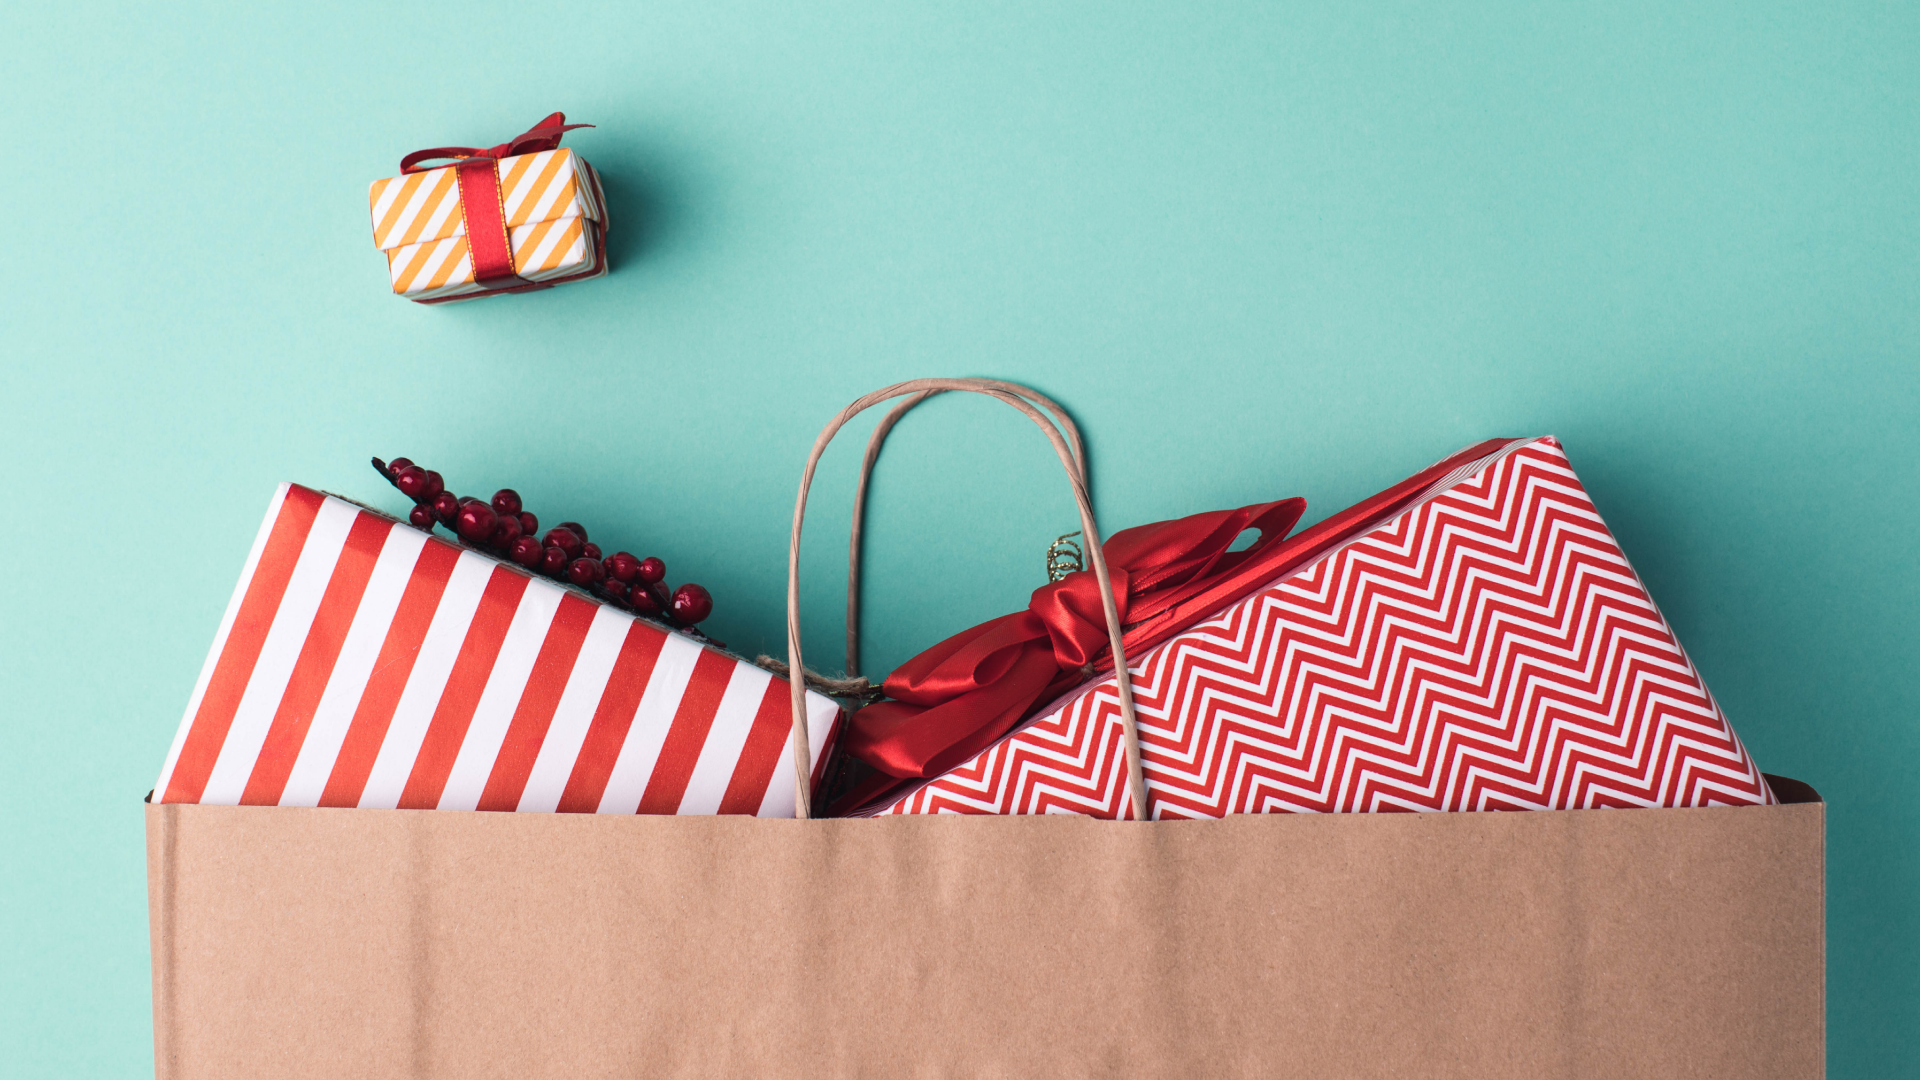 How to spend only $11.11 on online shopping during the holidays